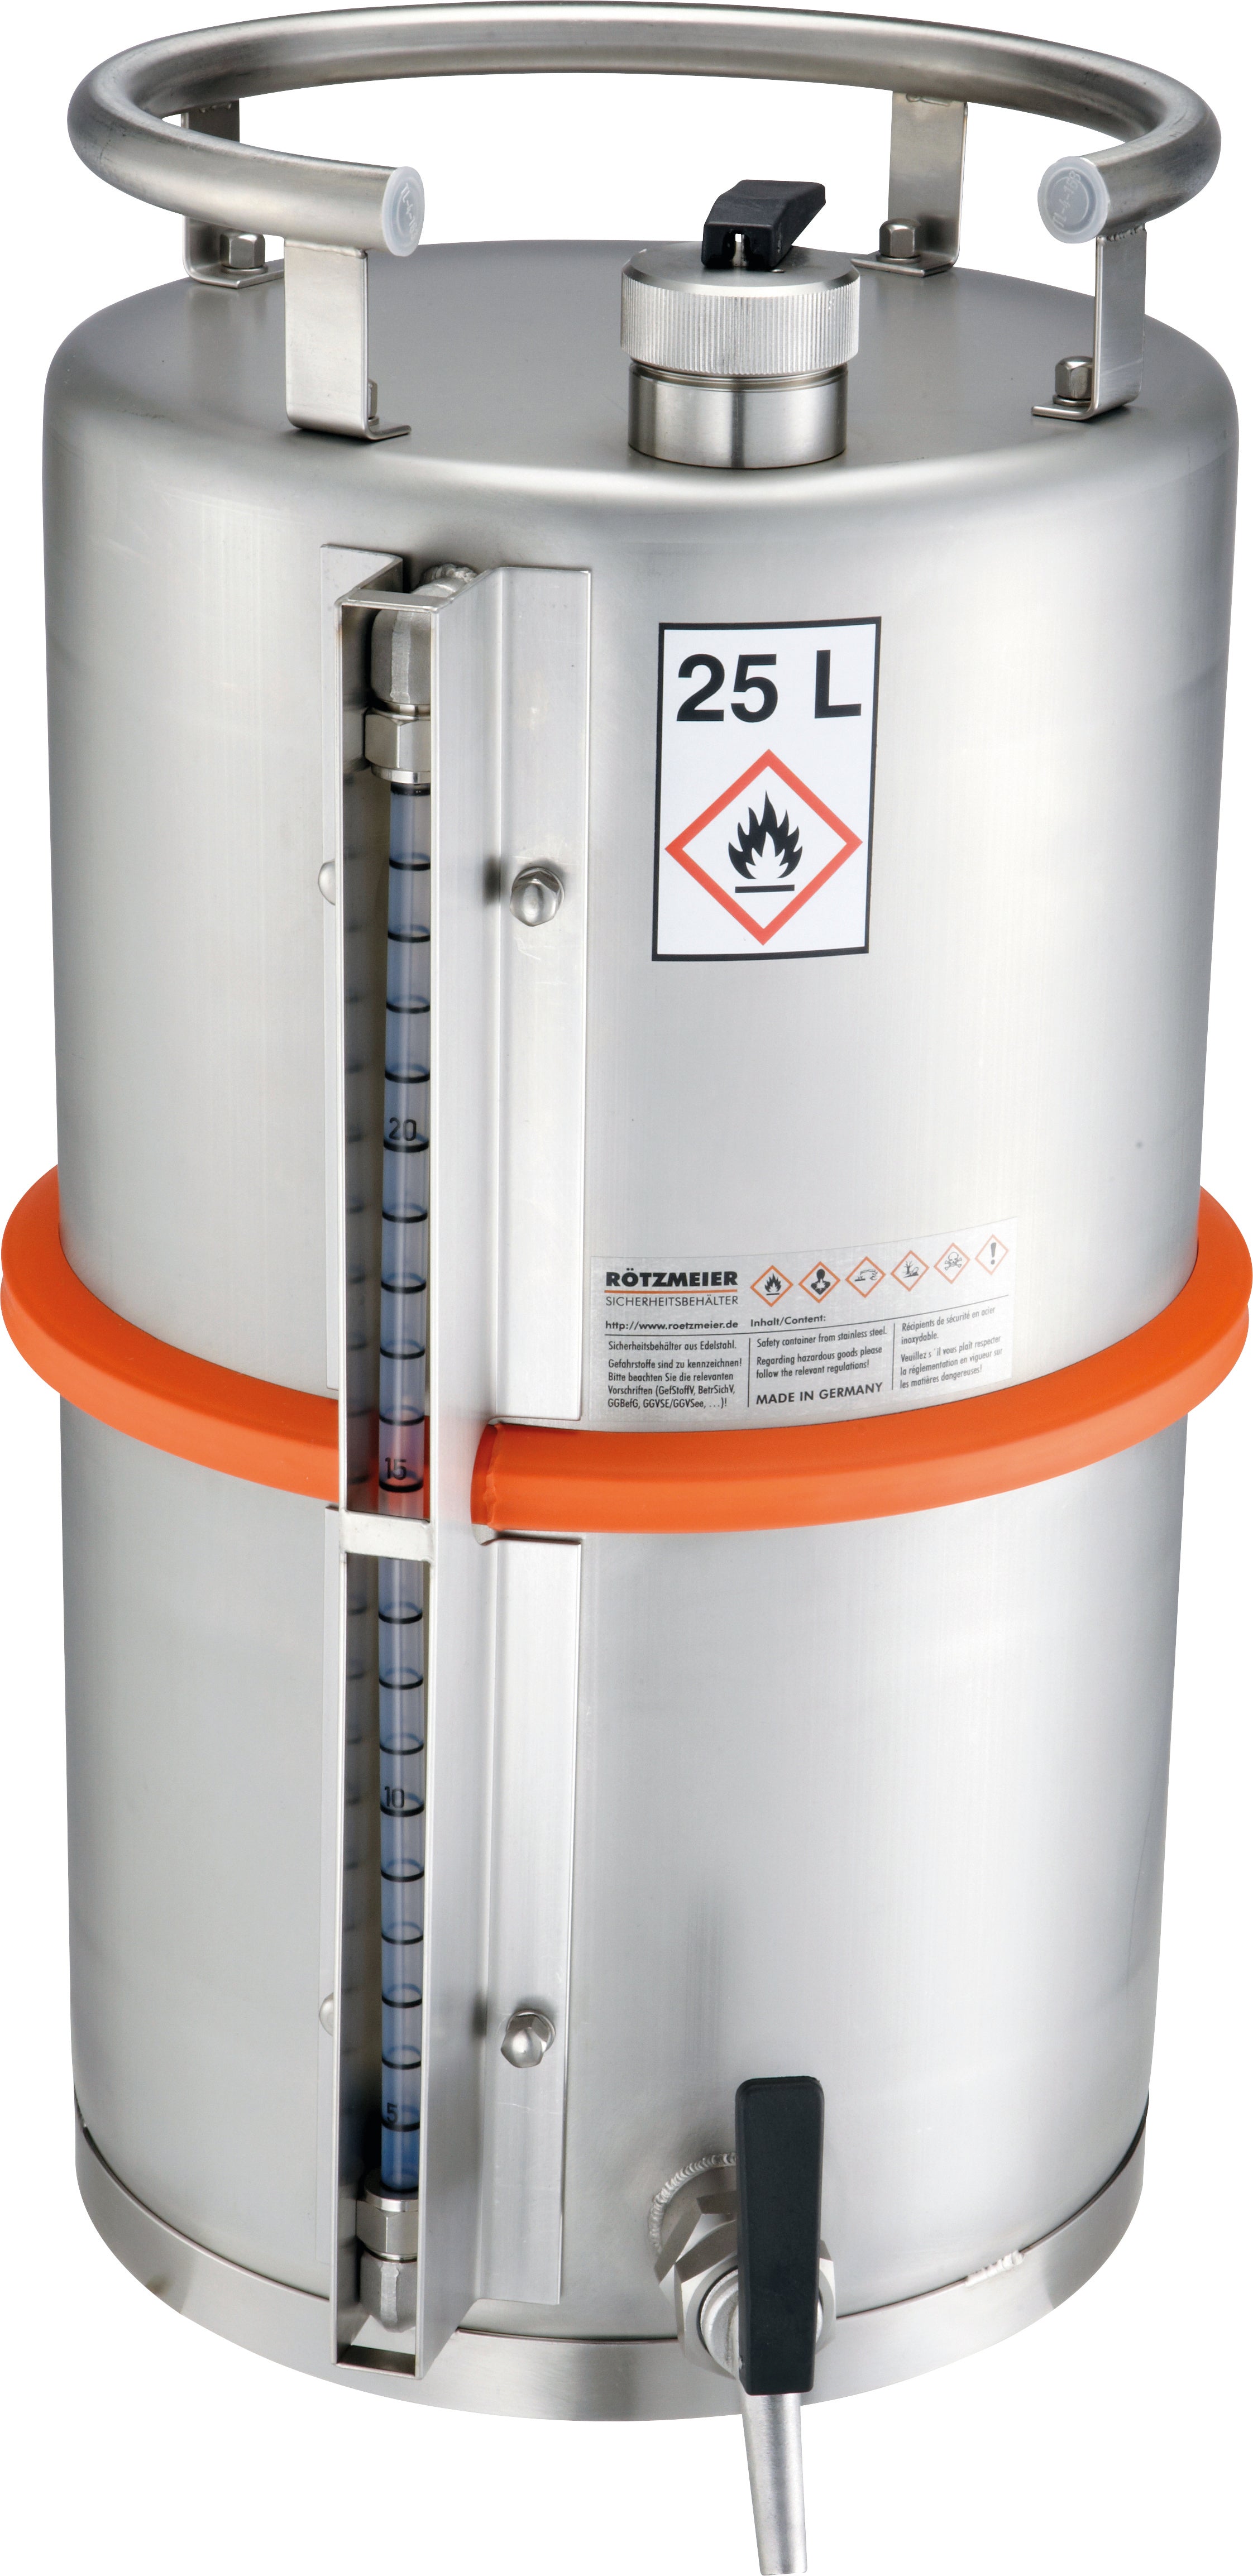 Safety container st.steel 1.4571, 25 L, stainless steel 1.4571 mat